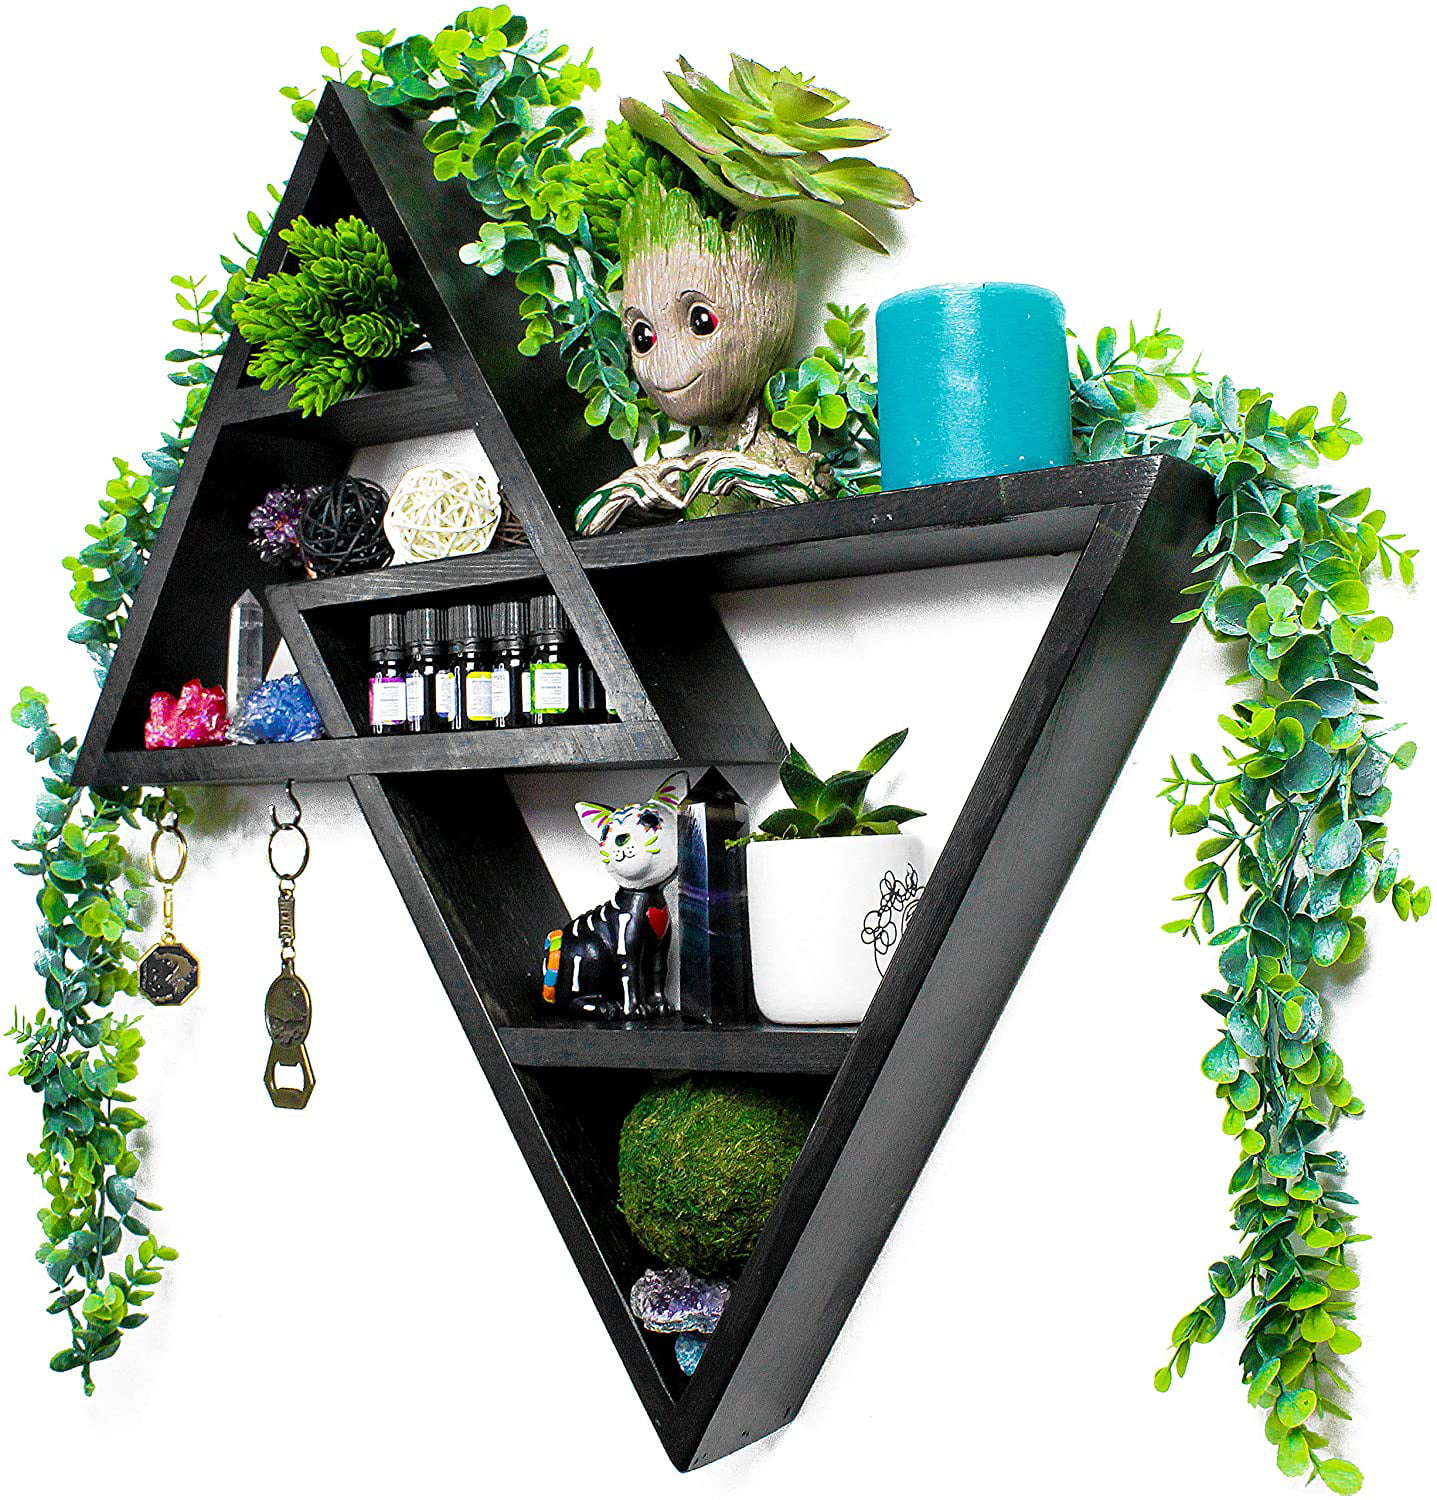 Black, Left Triangle Up Rustic Curiosities Large Triangle Shelf Essential Oils and More 24.5 X 23 Inches Crystal Display Shelf for Stones